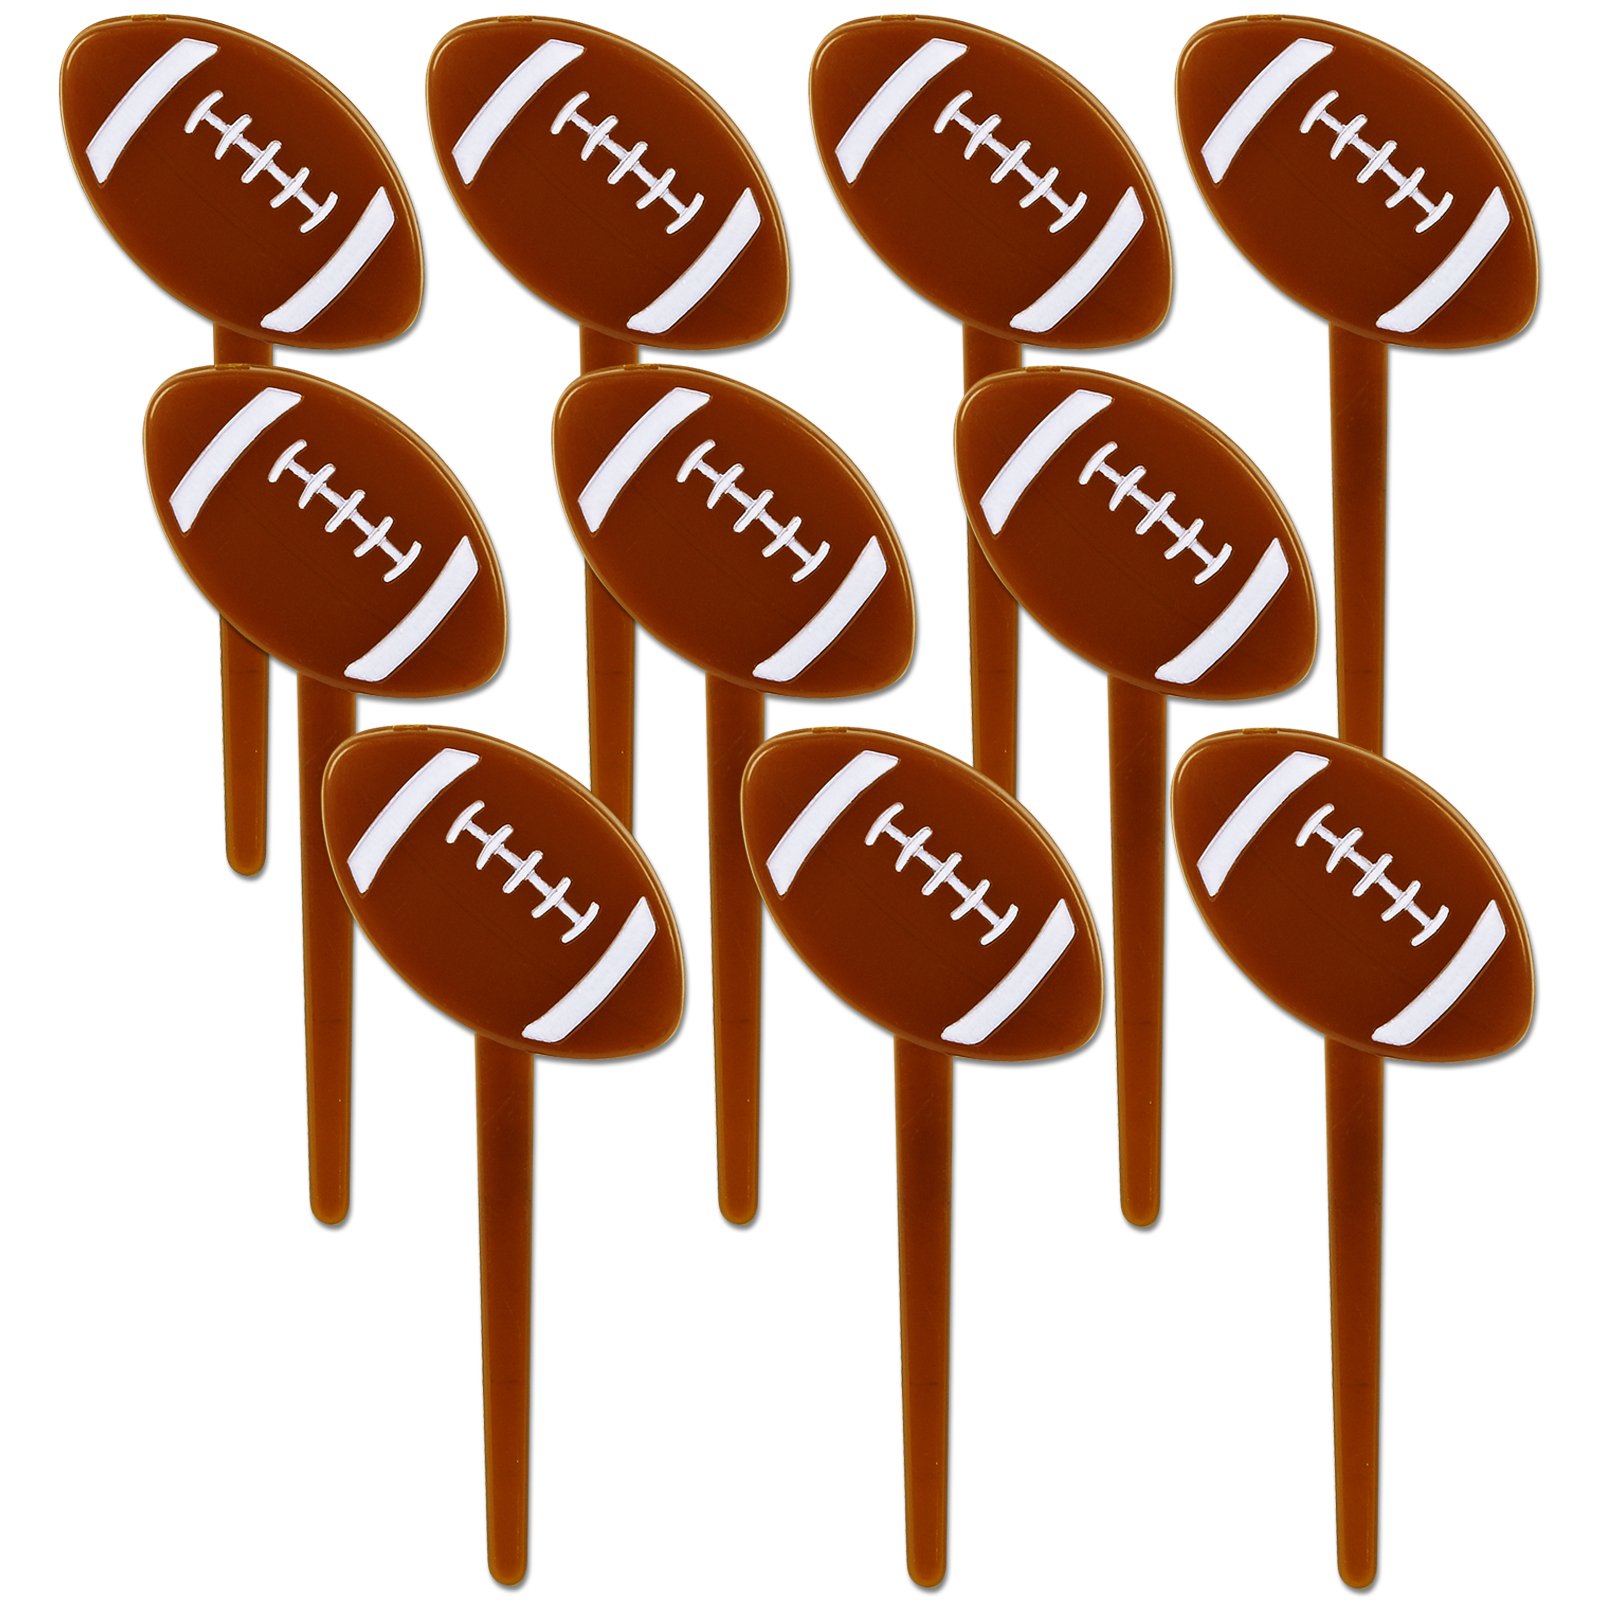 3" Football Party Picks (36 count)